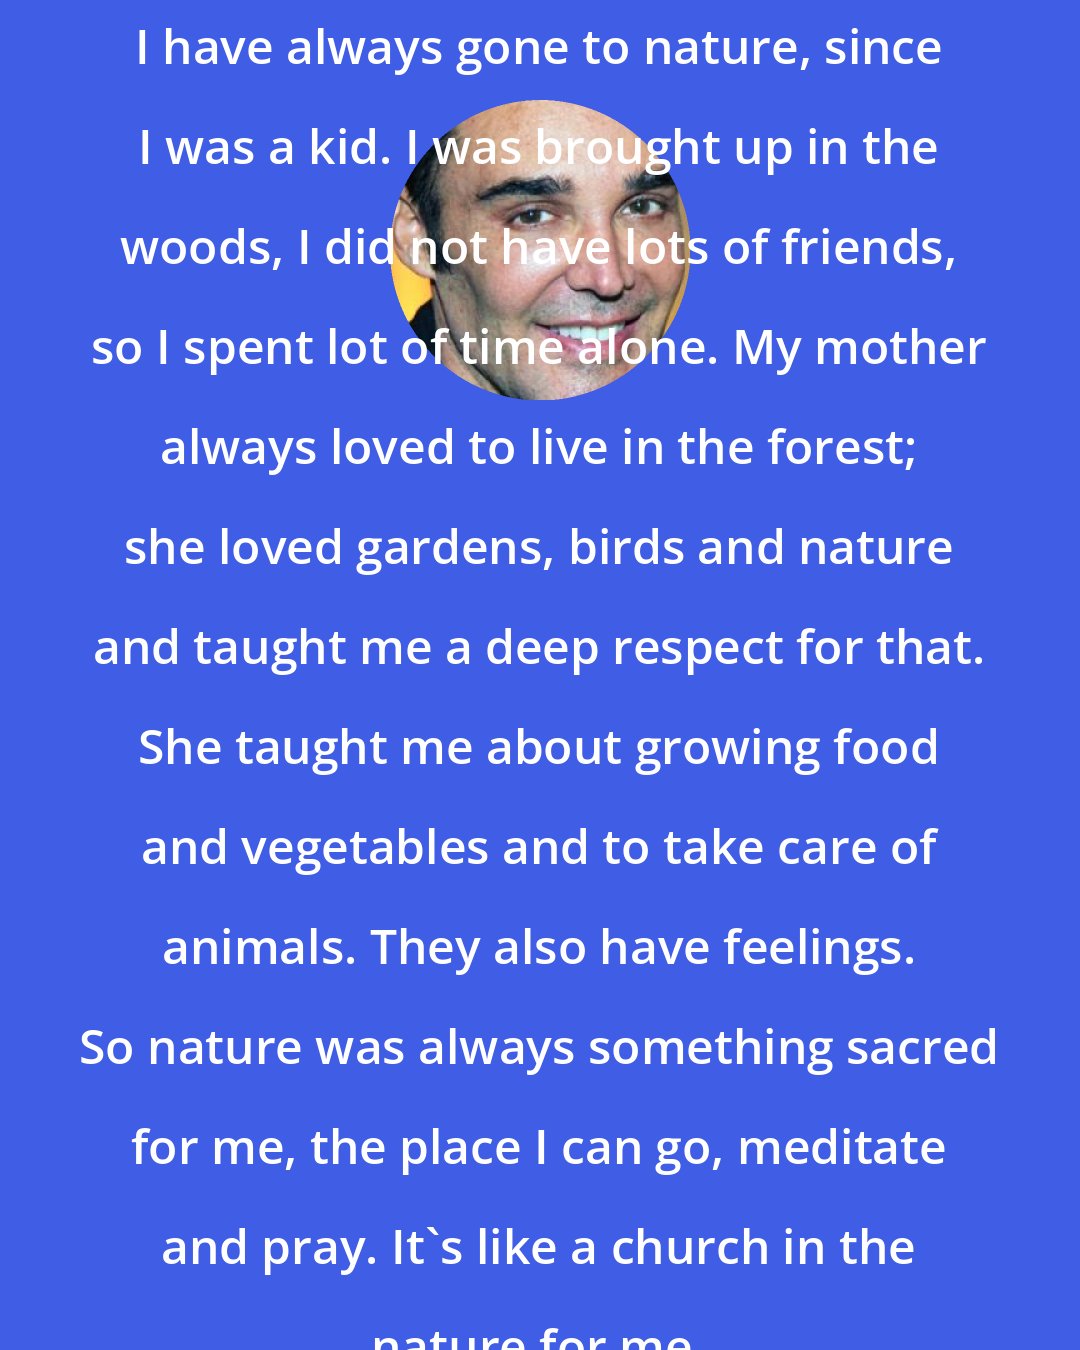 David LaChapelle: I have always gone to nature, since I was a kid. I was brought up in the woods, I did not have lots of friends, so I spent lot of time alone. My mother always loved to live in the forest; she loved gardens, birds and nature and taught me a deep respect for that. She taught me about growing food and vegetables and to take care of animals. They also have feelings. So nature was always something sacred for me, the place I can go, meditate and pray. It's like a church in the nature for me.